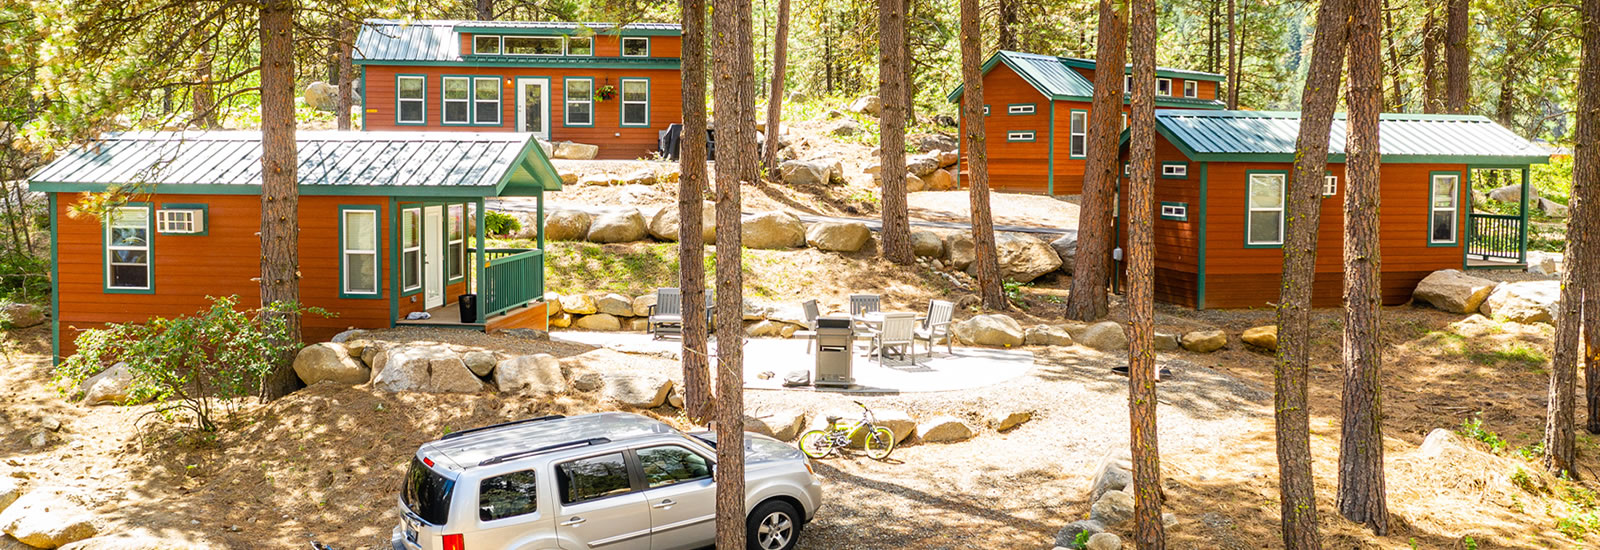 Extended camping season - when you reserve a cabin, you can comfortably camp into fall and earlier in the spring, so you can pack in as much camping fun as possible each year